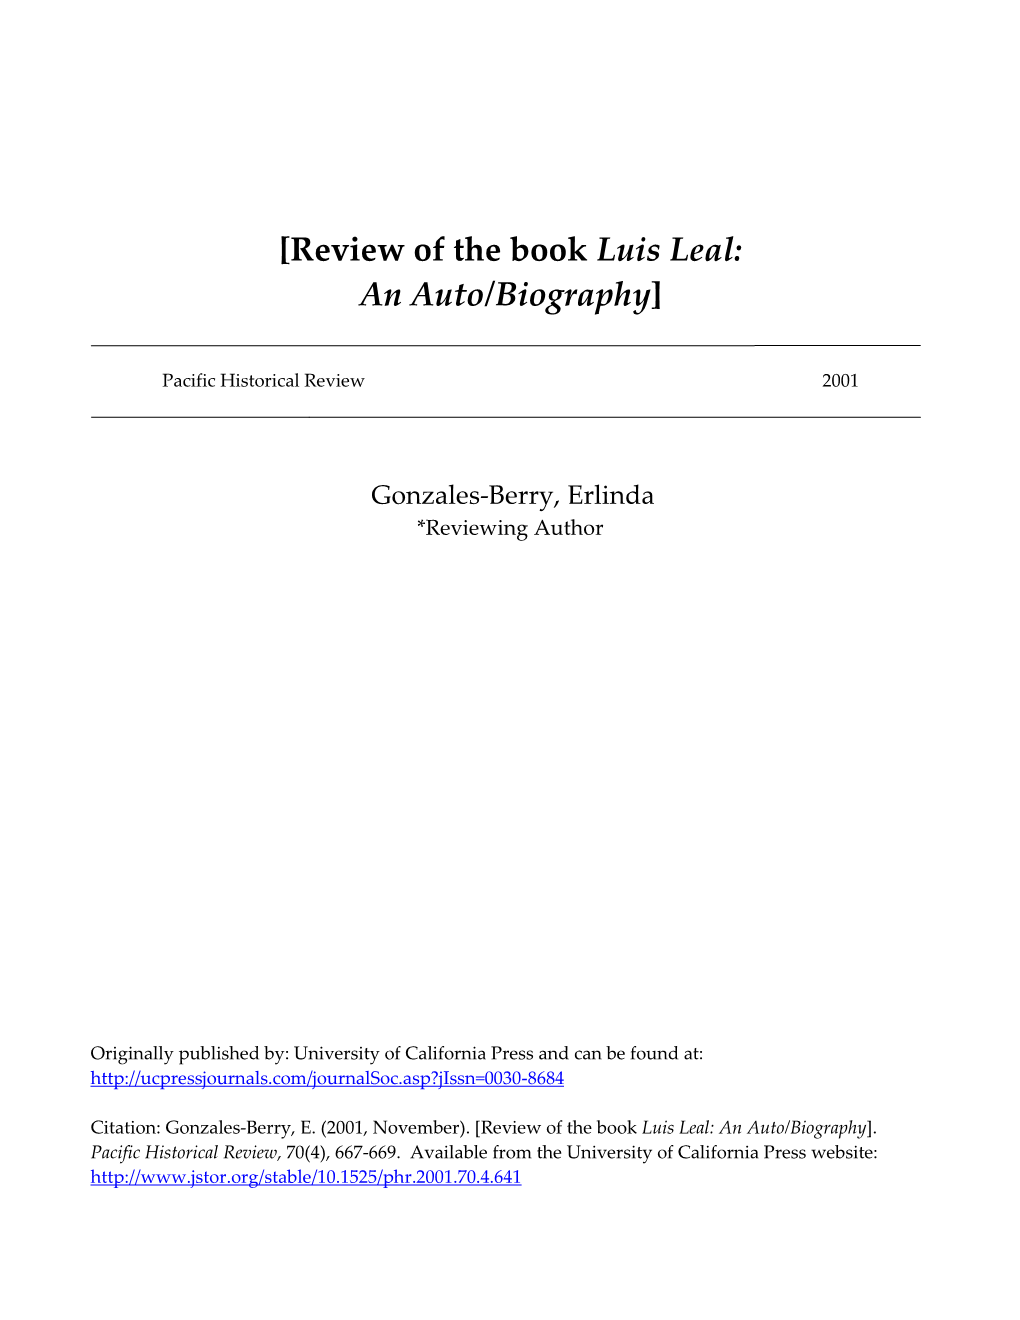 [Review of the Book Luis Leal: an Auto/Biography]